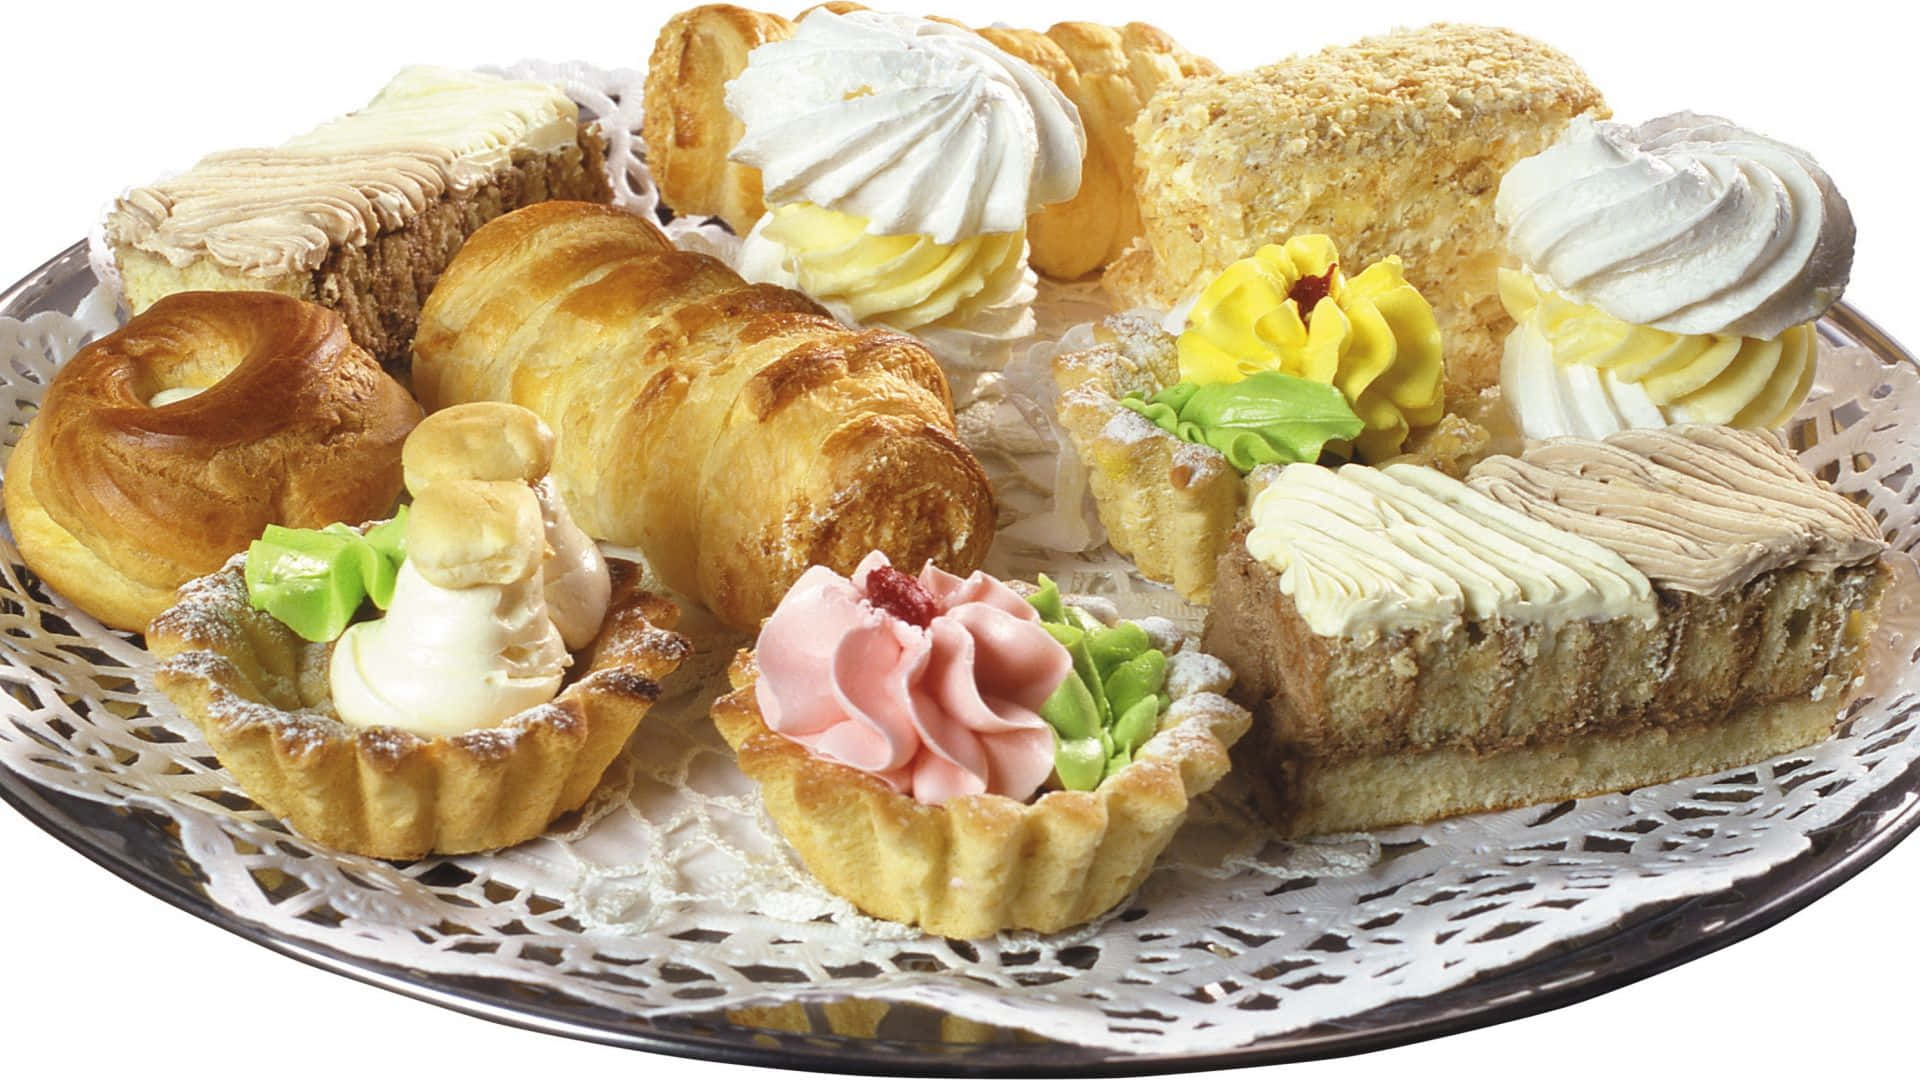 Let your taste buds be tantalized with this delicious pastry.